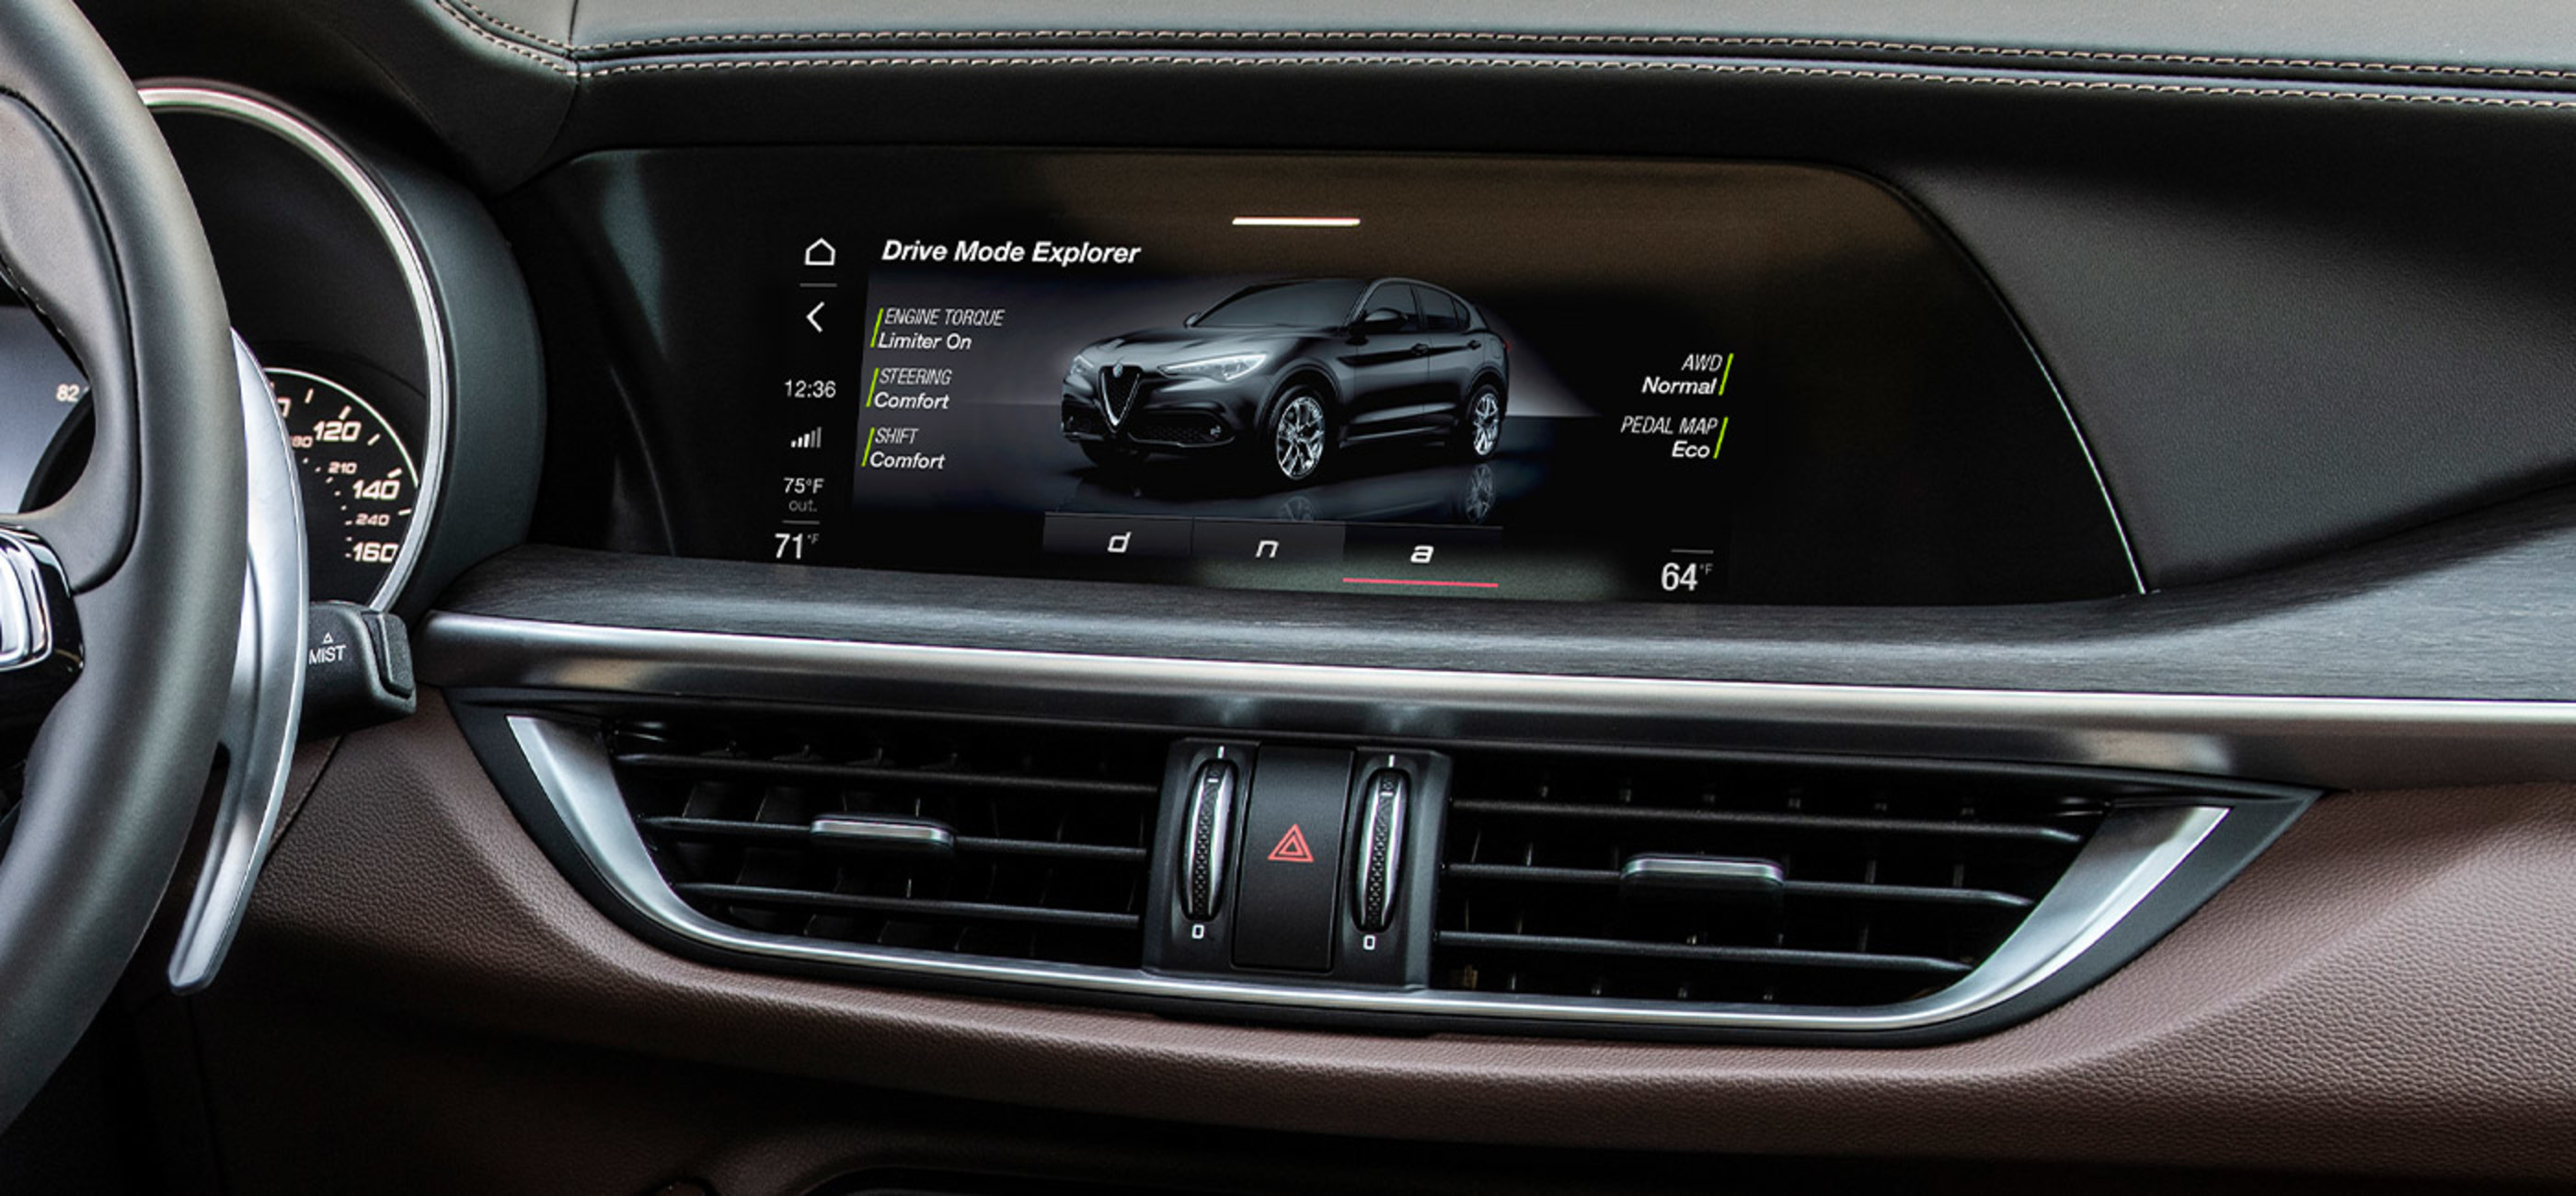 A close-up of the drive mode explorer interface displayed on the infotainment system with 8.8-inch multi-touch screen inside the Alfa Romeo Stelvio.